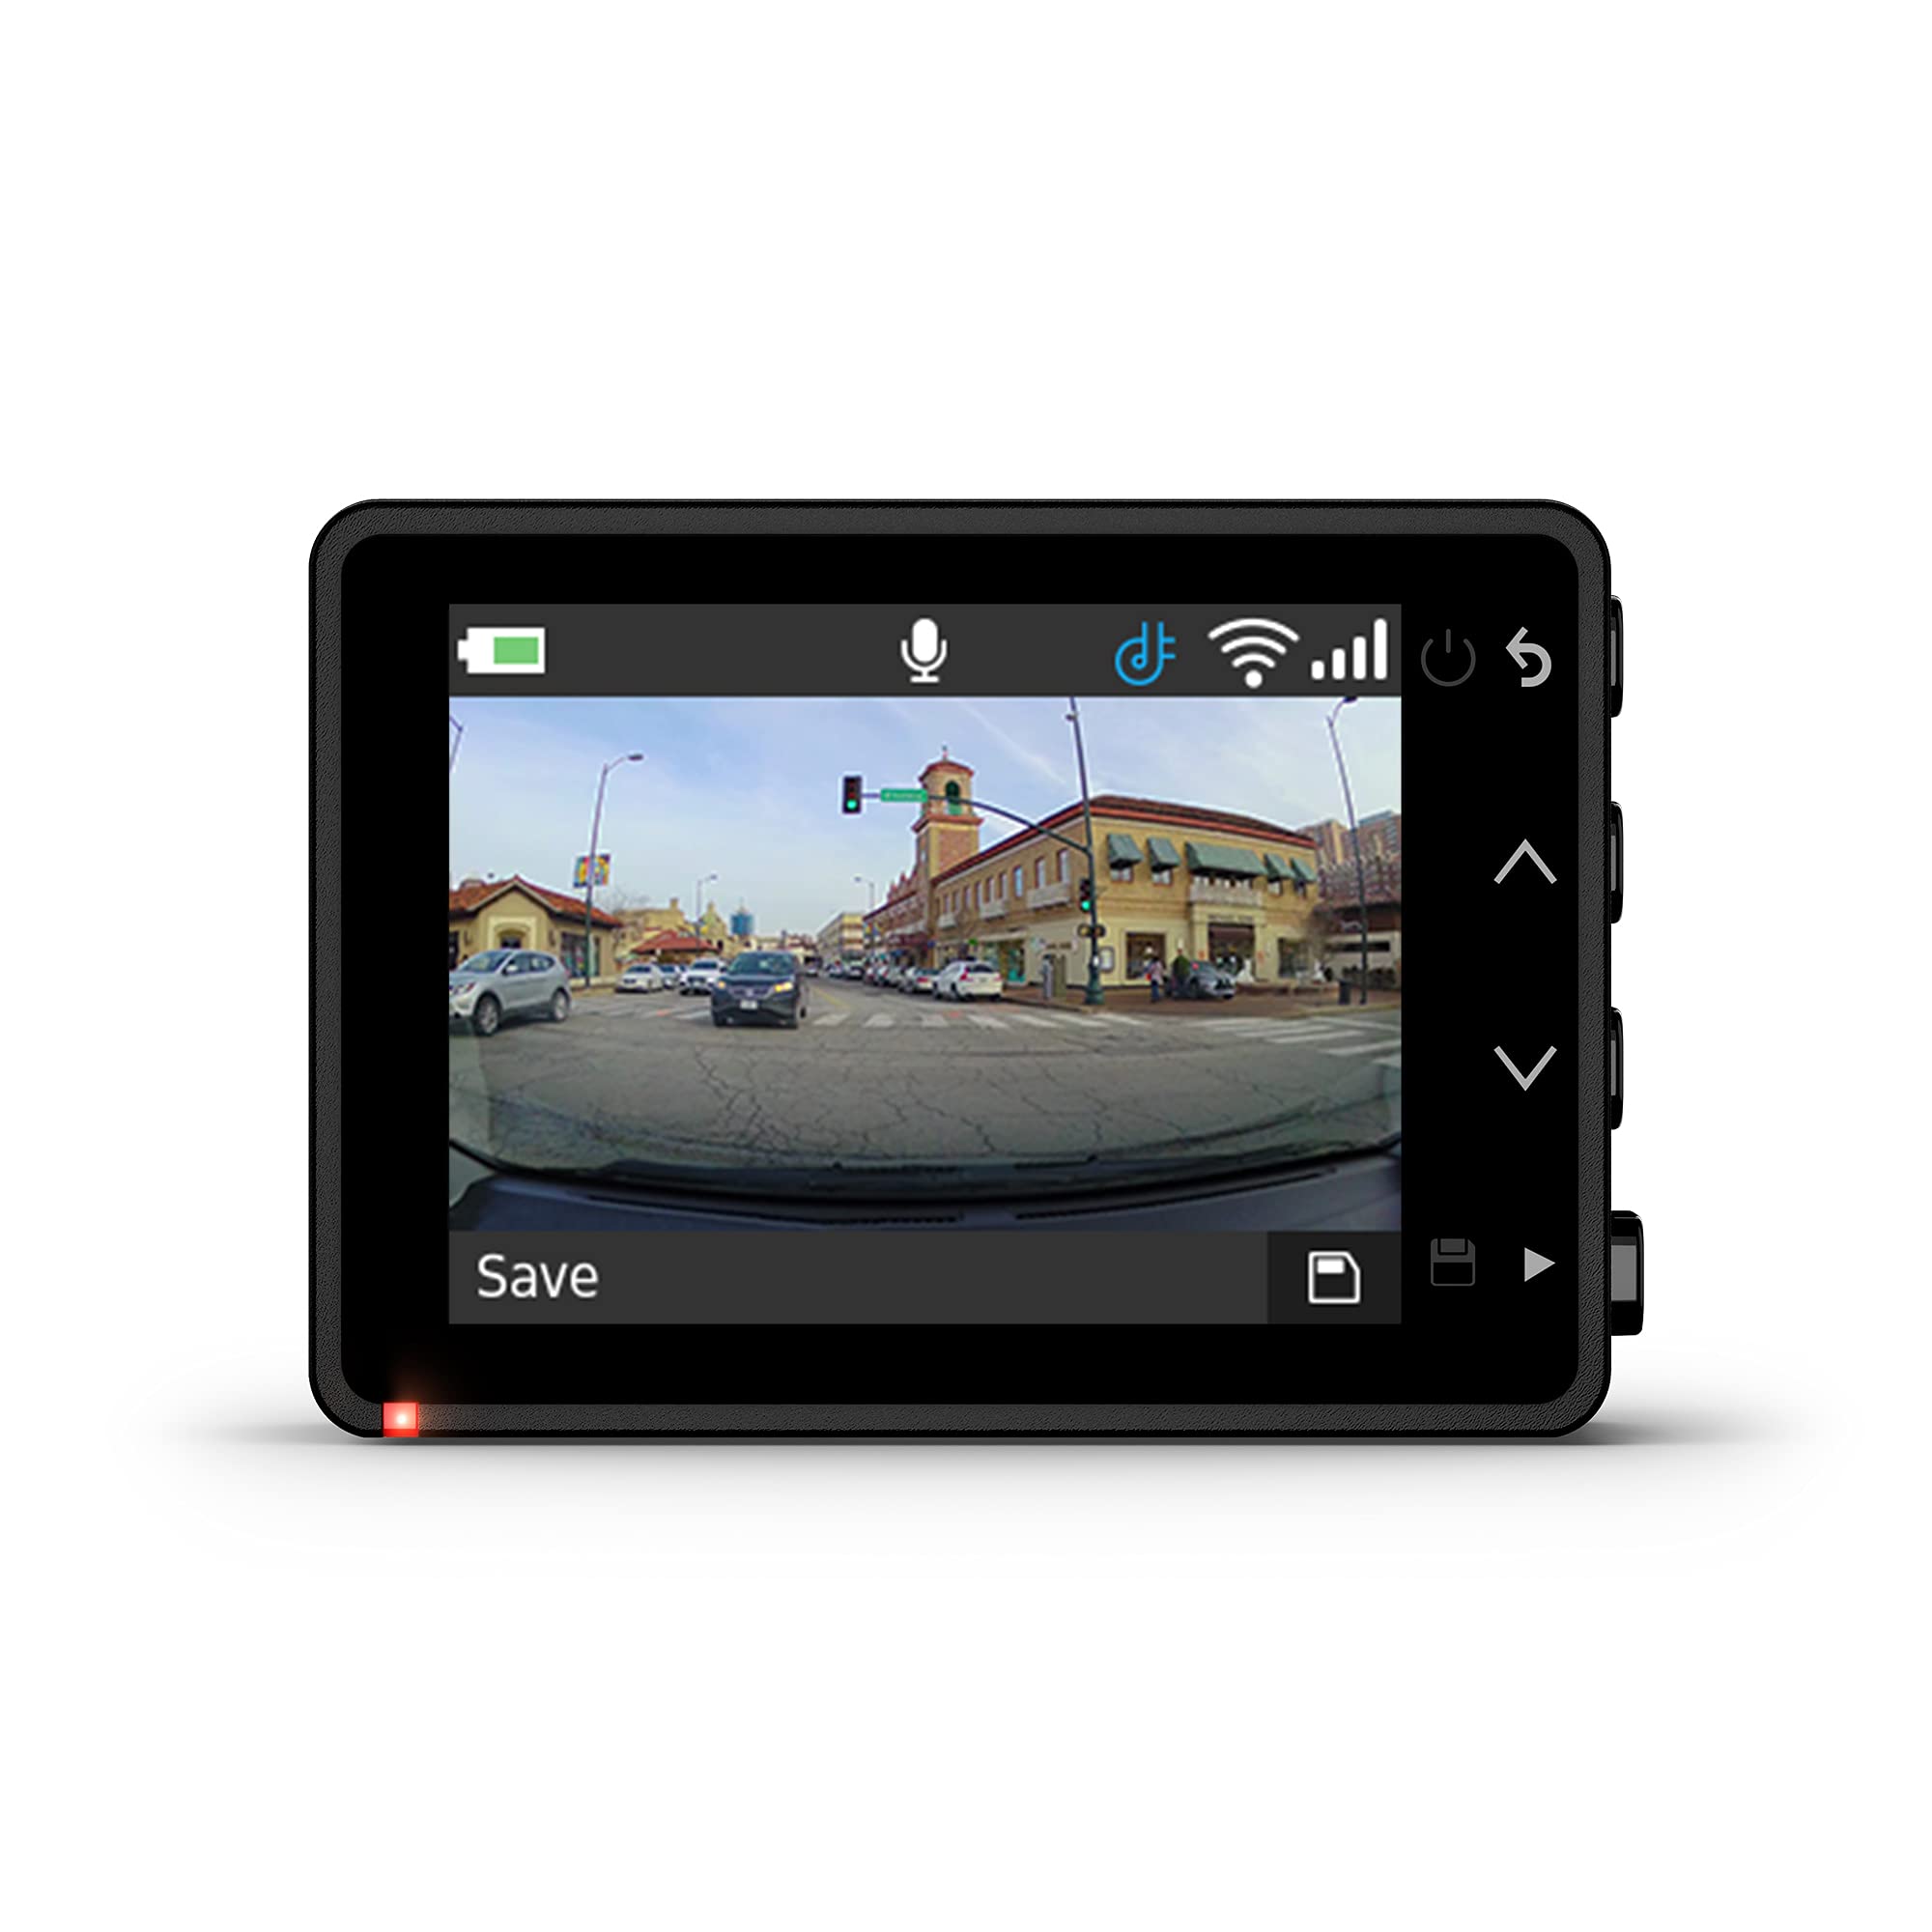 Garmin Dash Cam 57, 1440p and 140-degree FOV, Monitor Your Vehicle While Away w/ New Connected Features, Voice Control, Compact and Discreet, Includes Memory Card